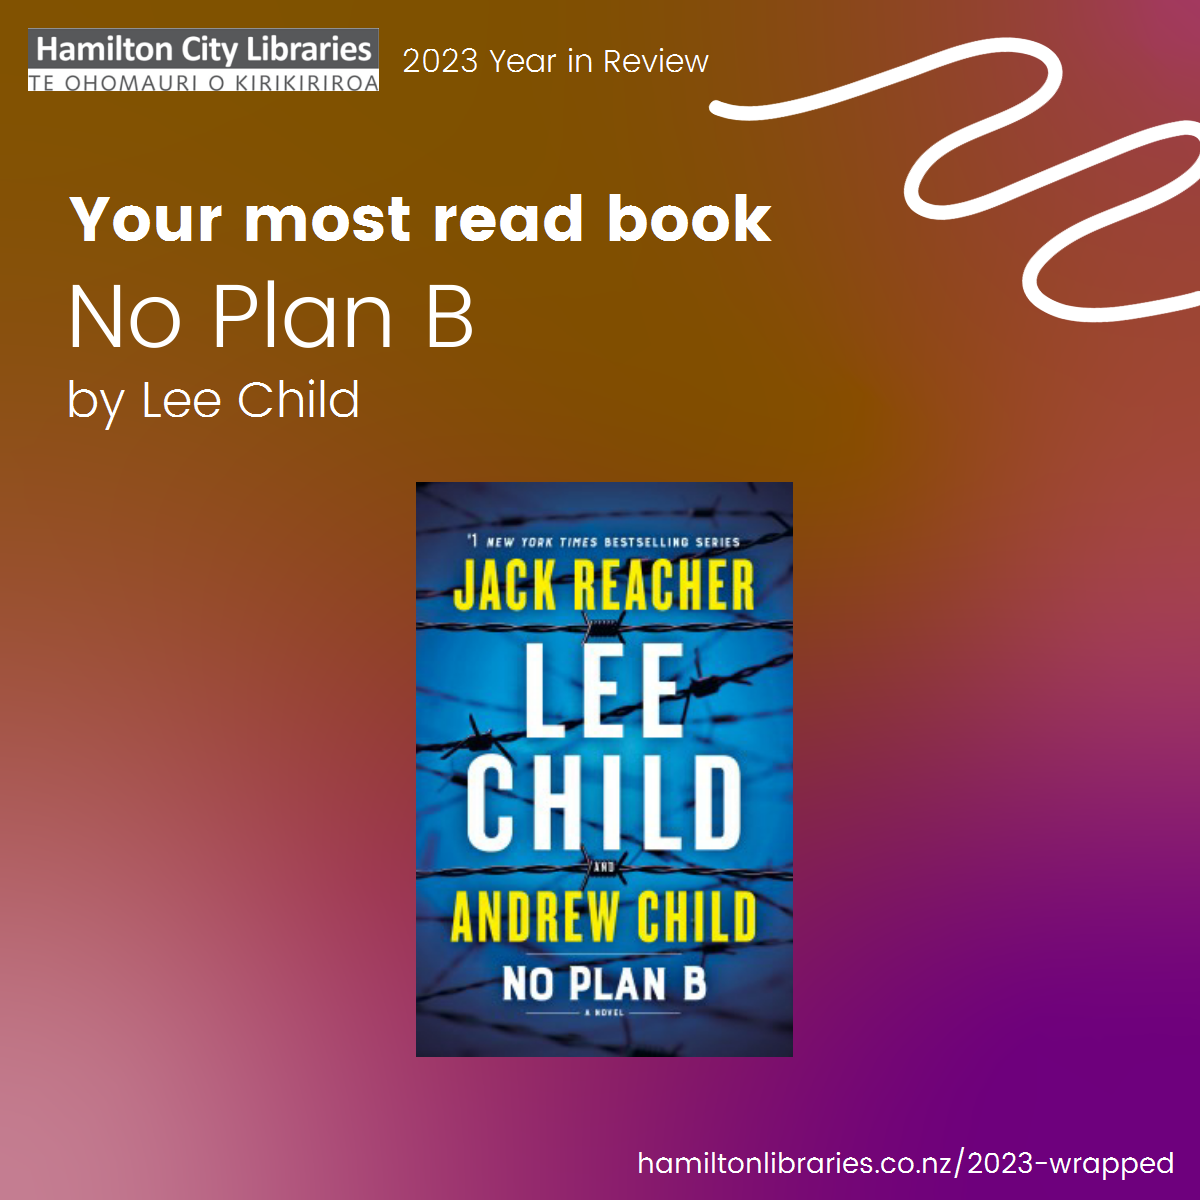 Top Book: No Plan B by Lee Child